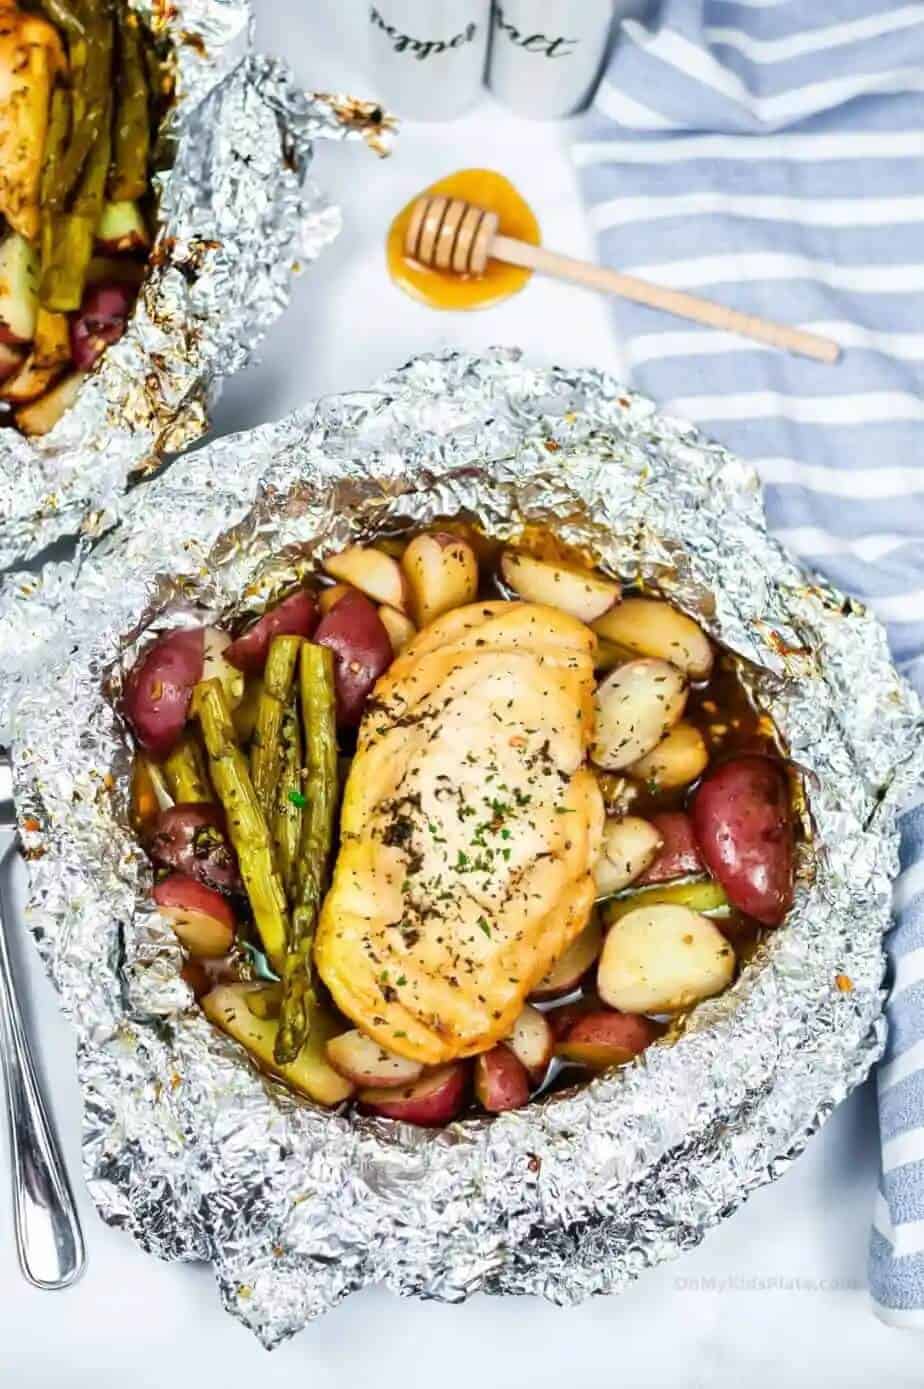 chicken and potatoes in an open foil packet after cooking in the campfire.